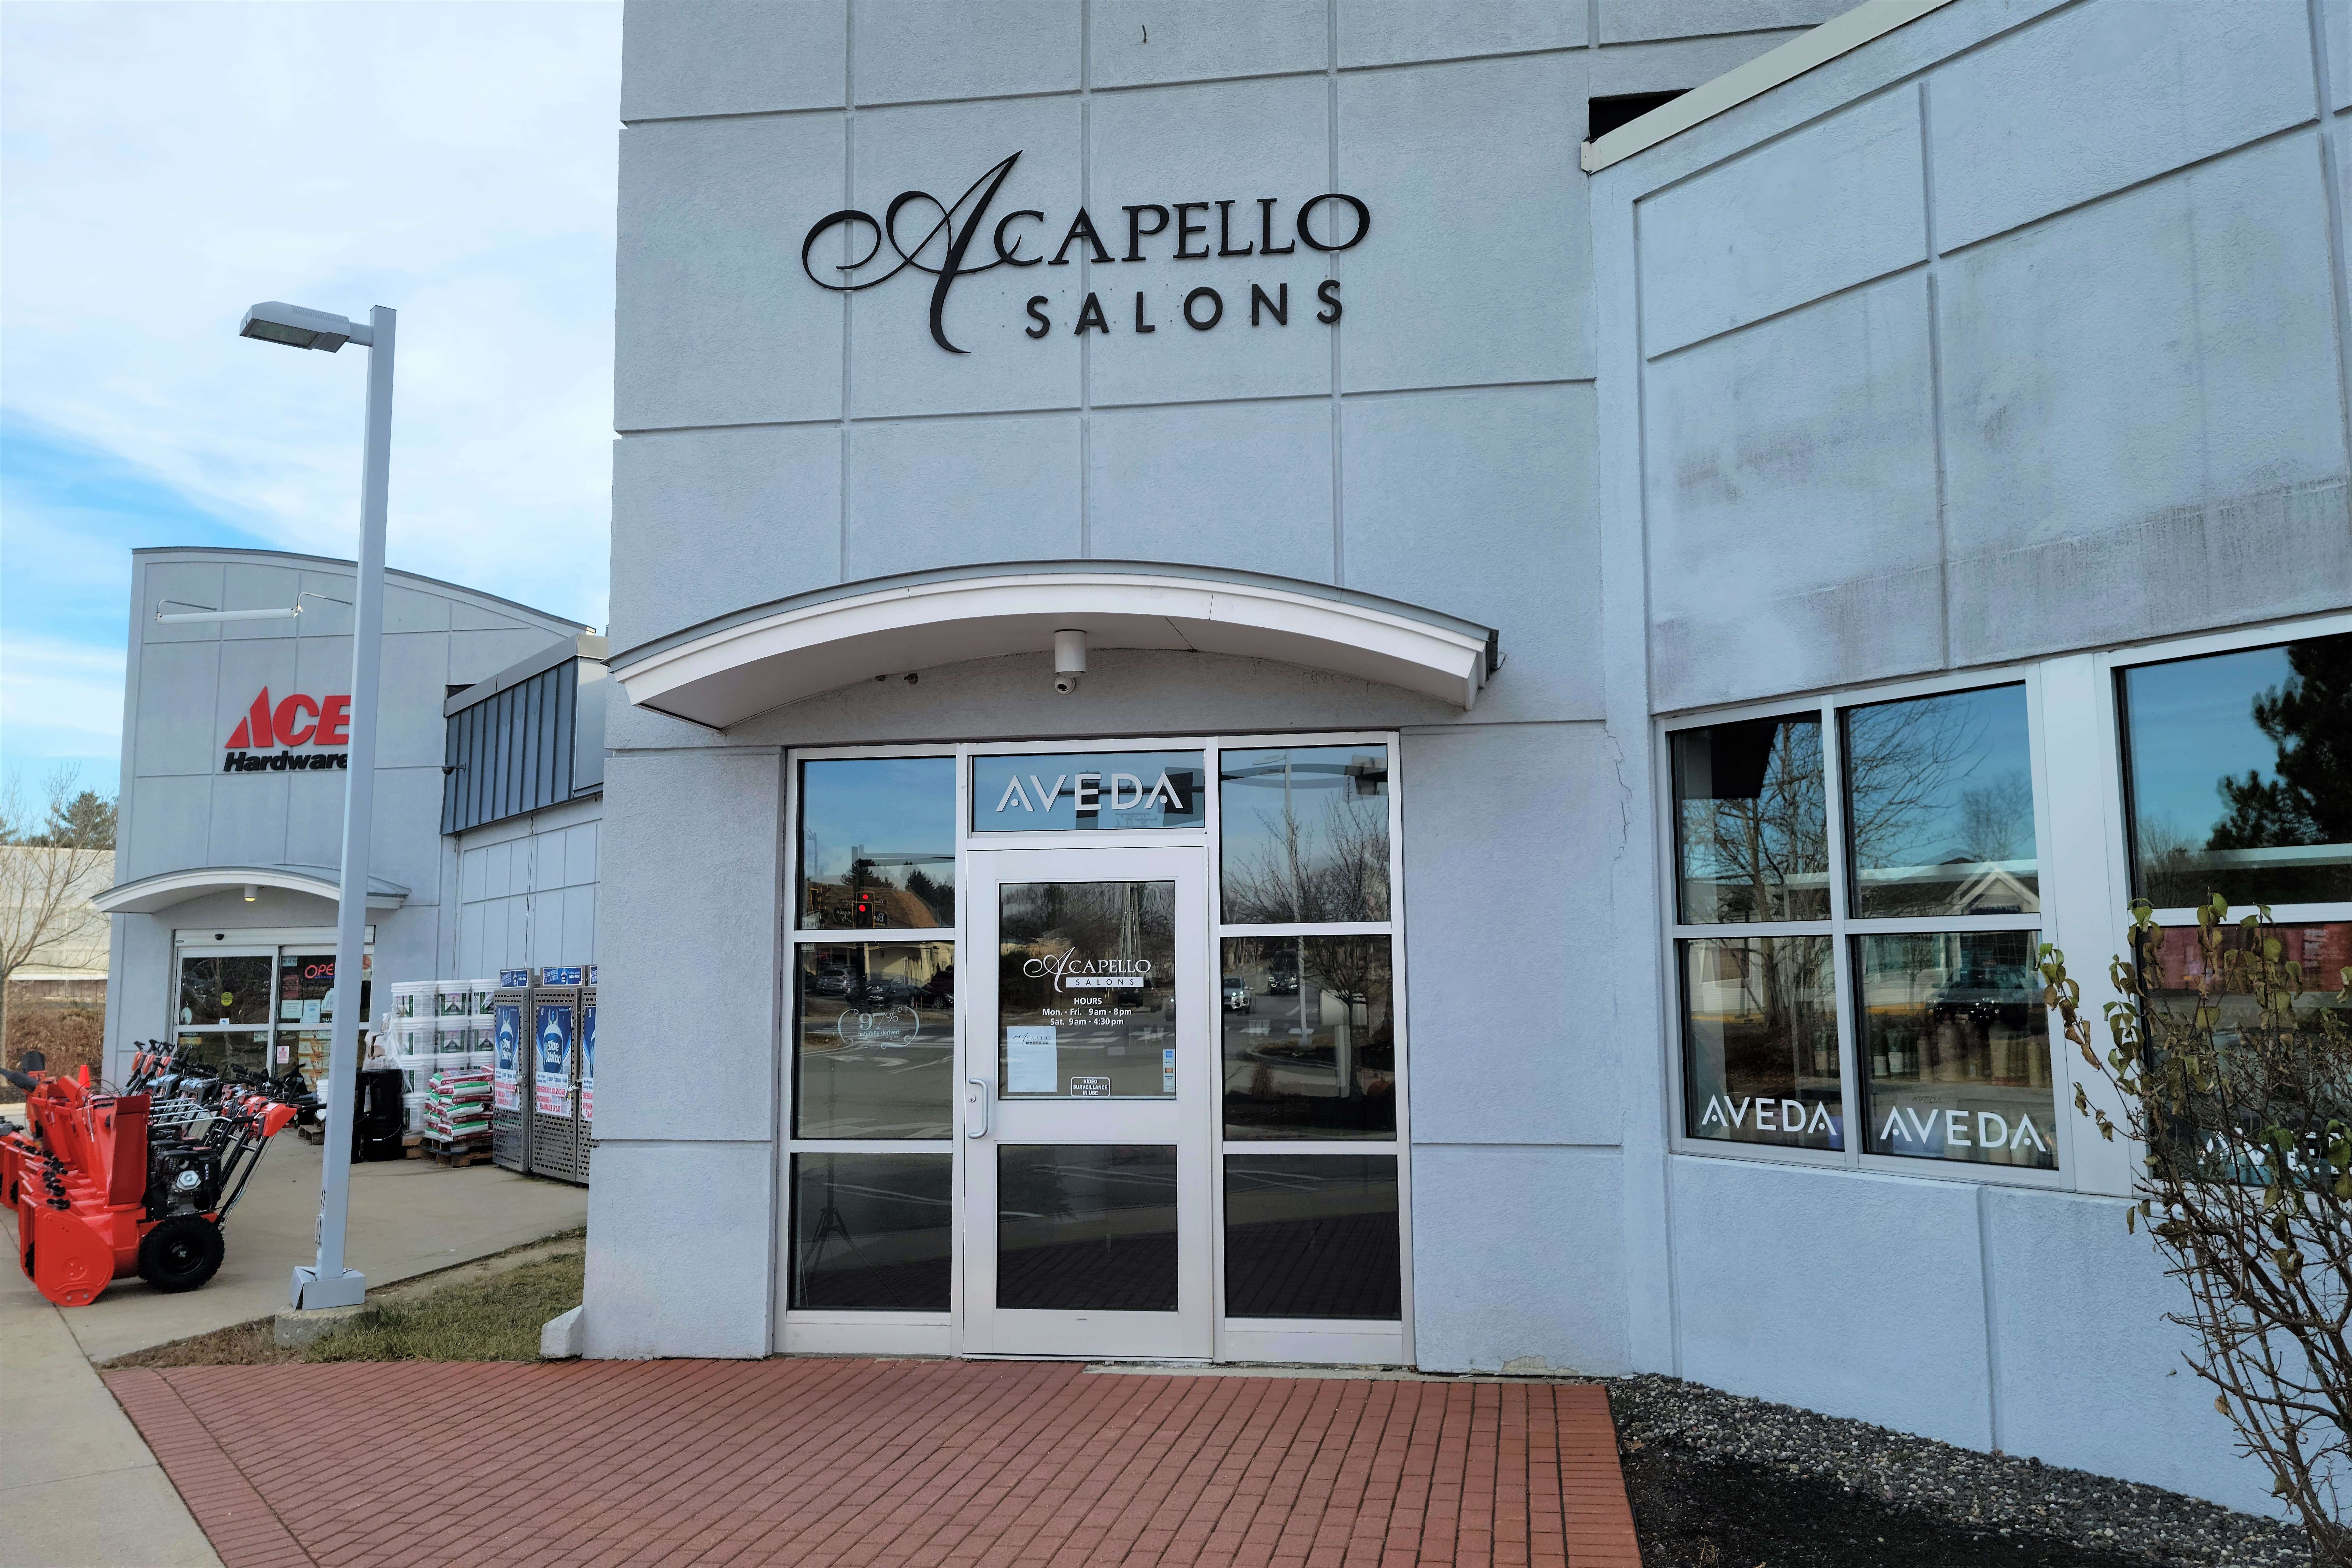 exterior of modern, gray concrete building with "Acapello Salons" sign